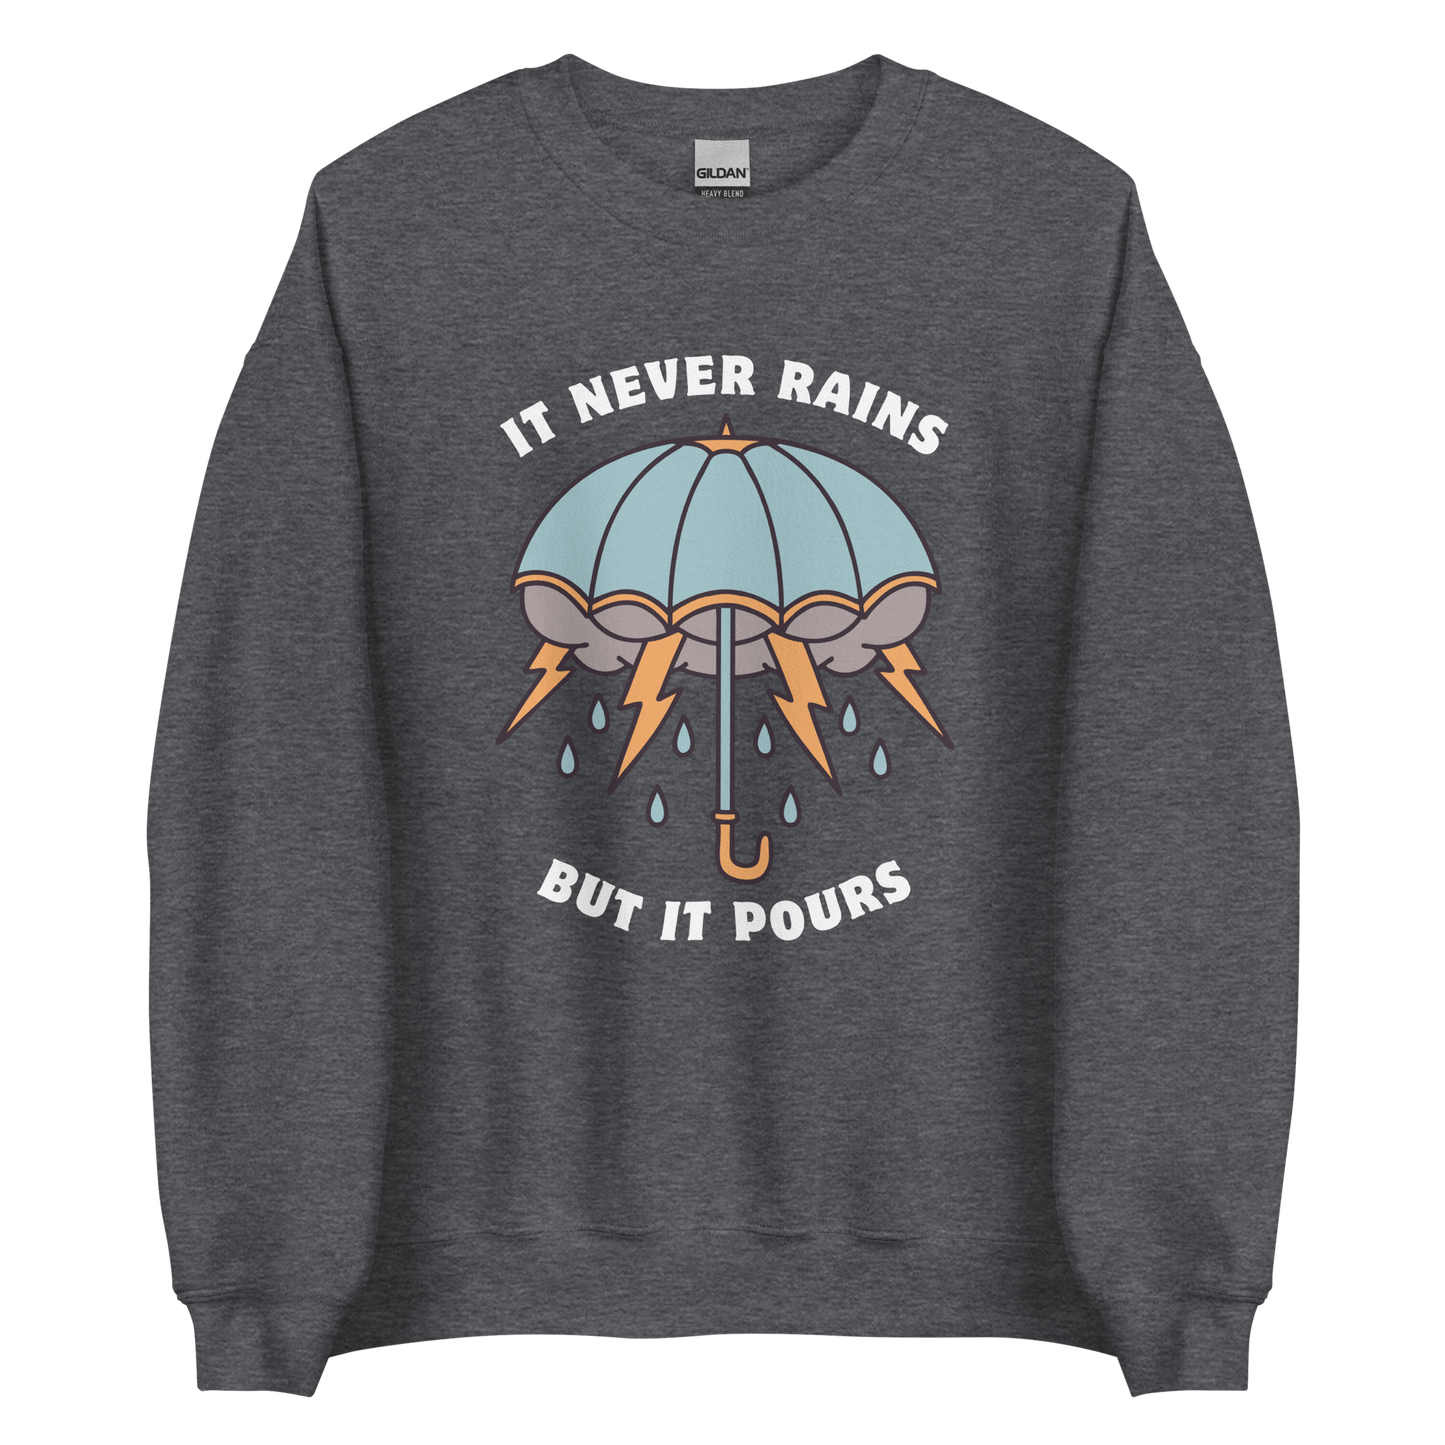 Dark Heather Umbrella Sweatshirt featuring a unique It Never Rains But It Pours graphic on the chest - Cool Tattoo-Inspired Graphic Umbrella Sweatshirts - Boozy Fox